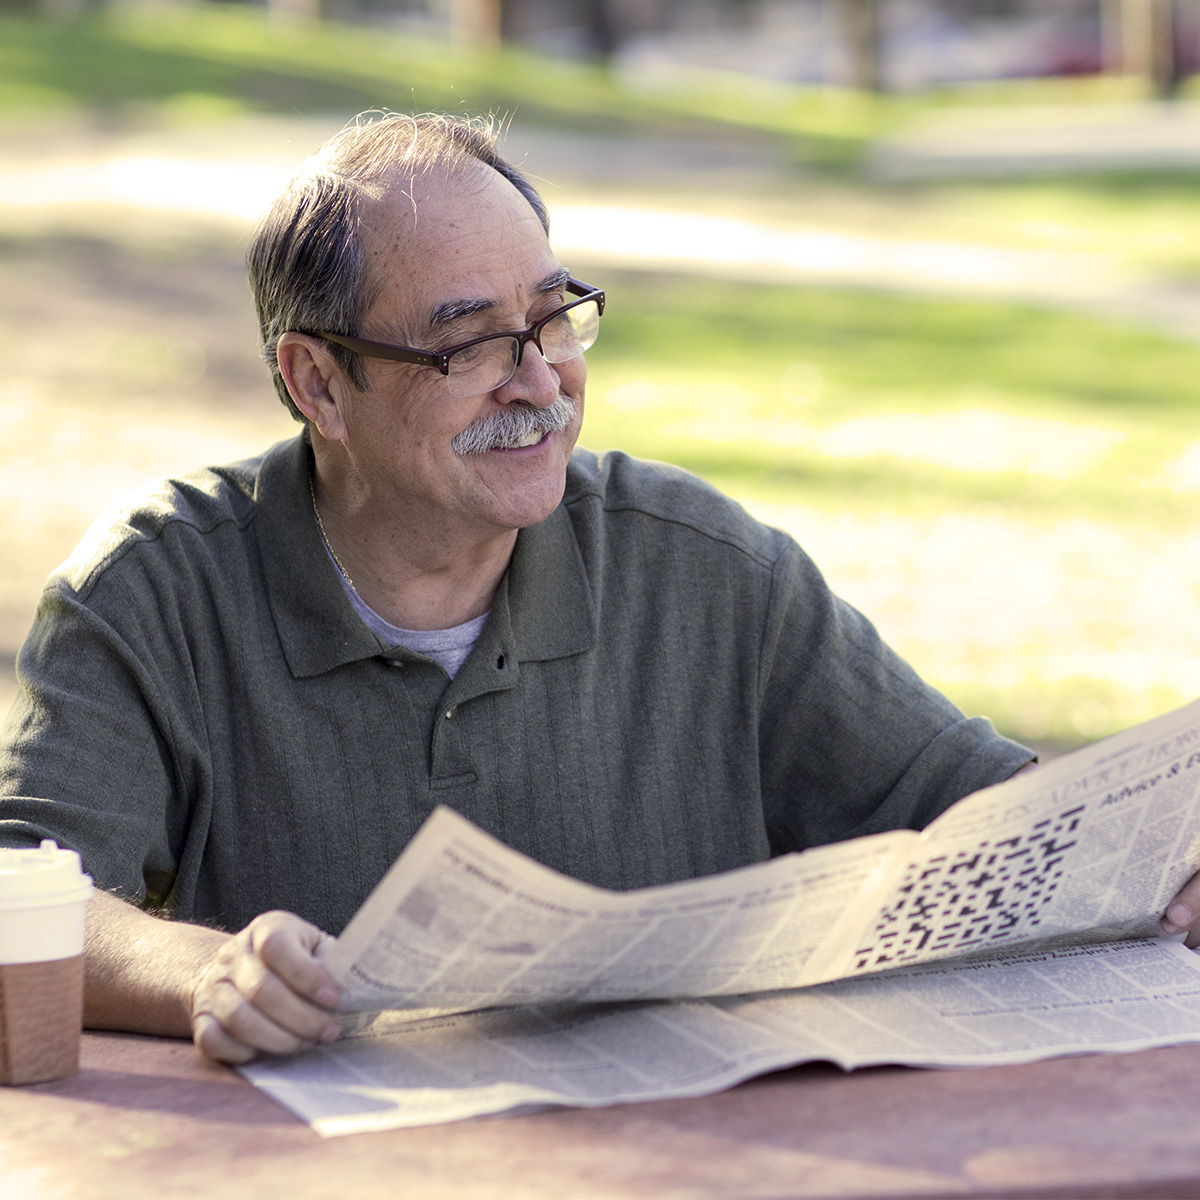 A man enjoying coffee and reading the newspaper in the park on a nice day.